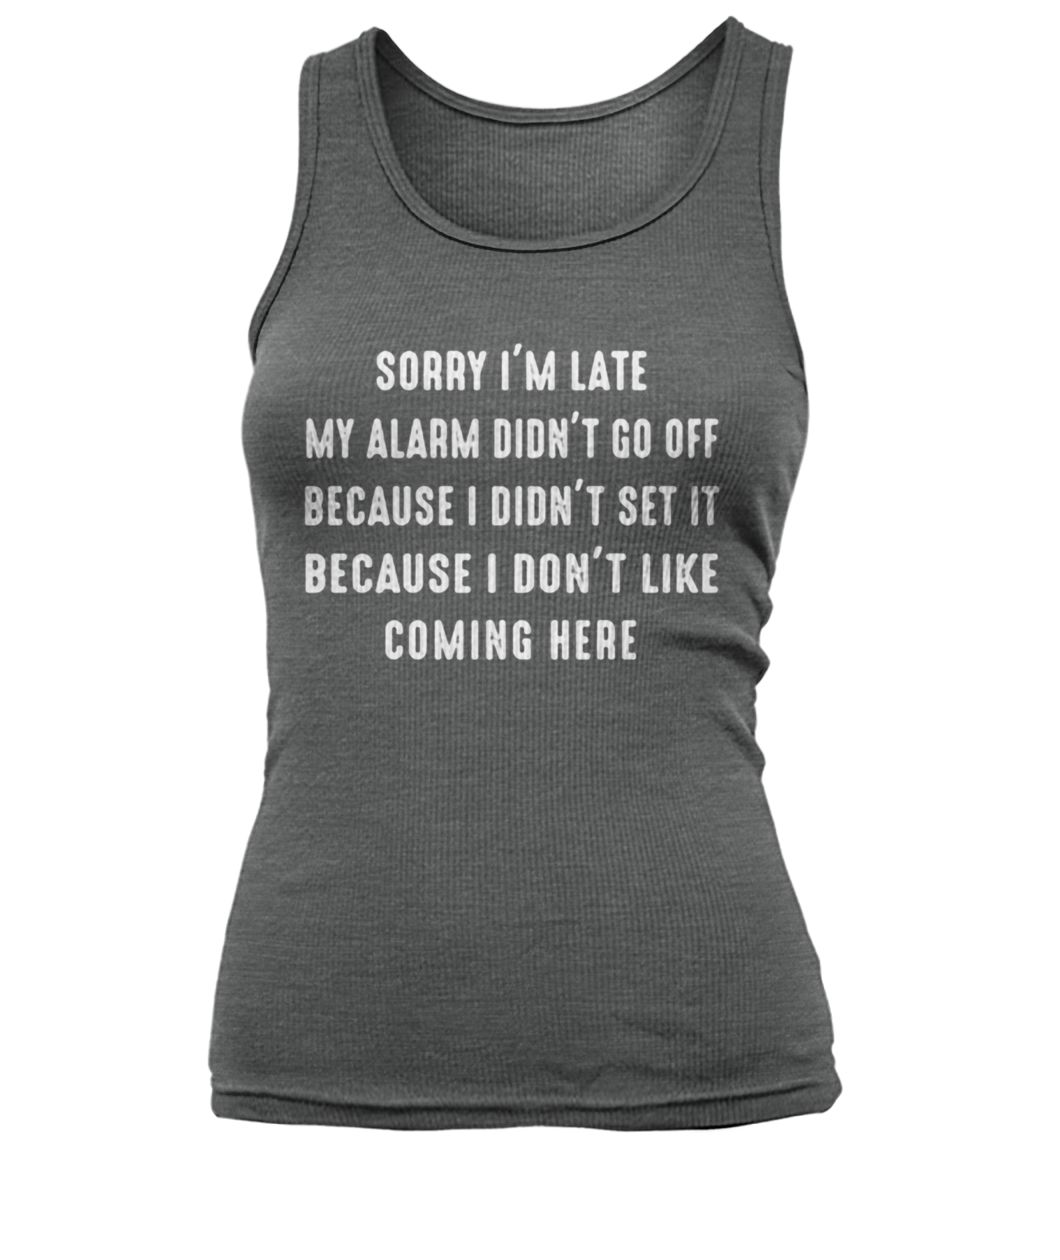 Sorry I'm late my alarm didn't go off women's tank top